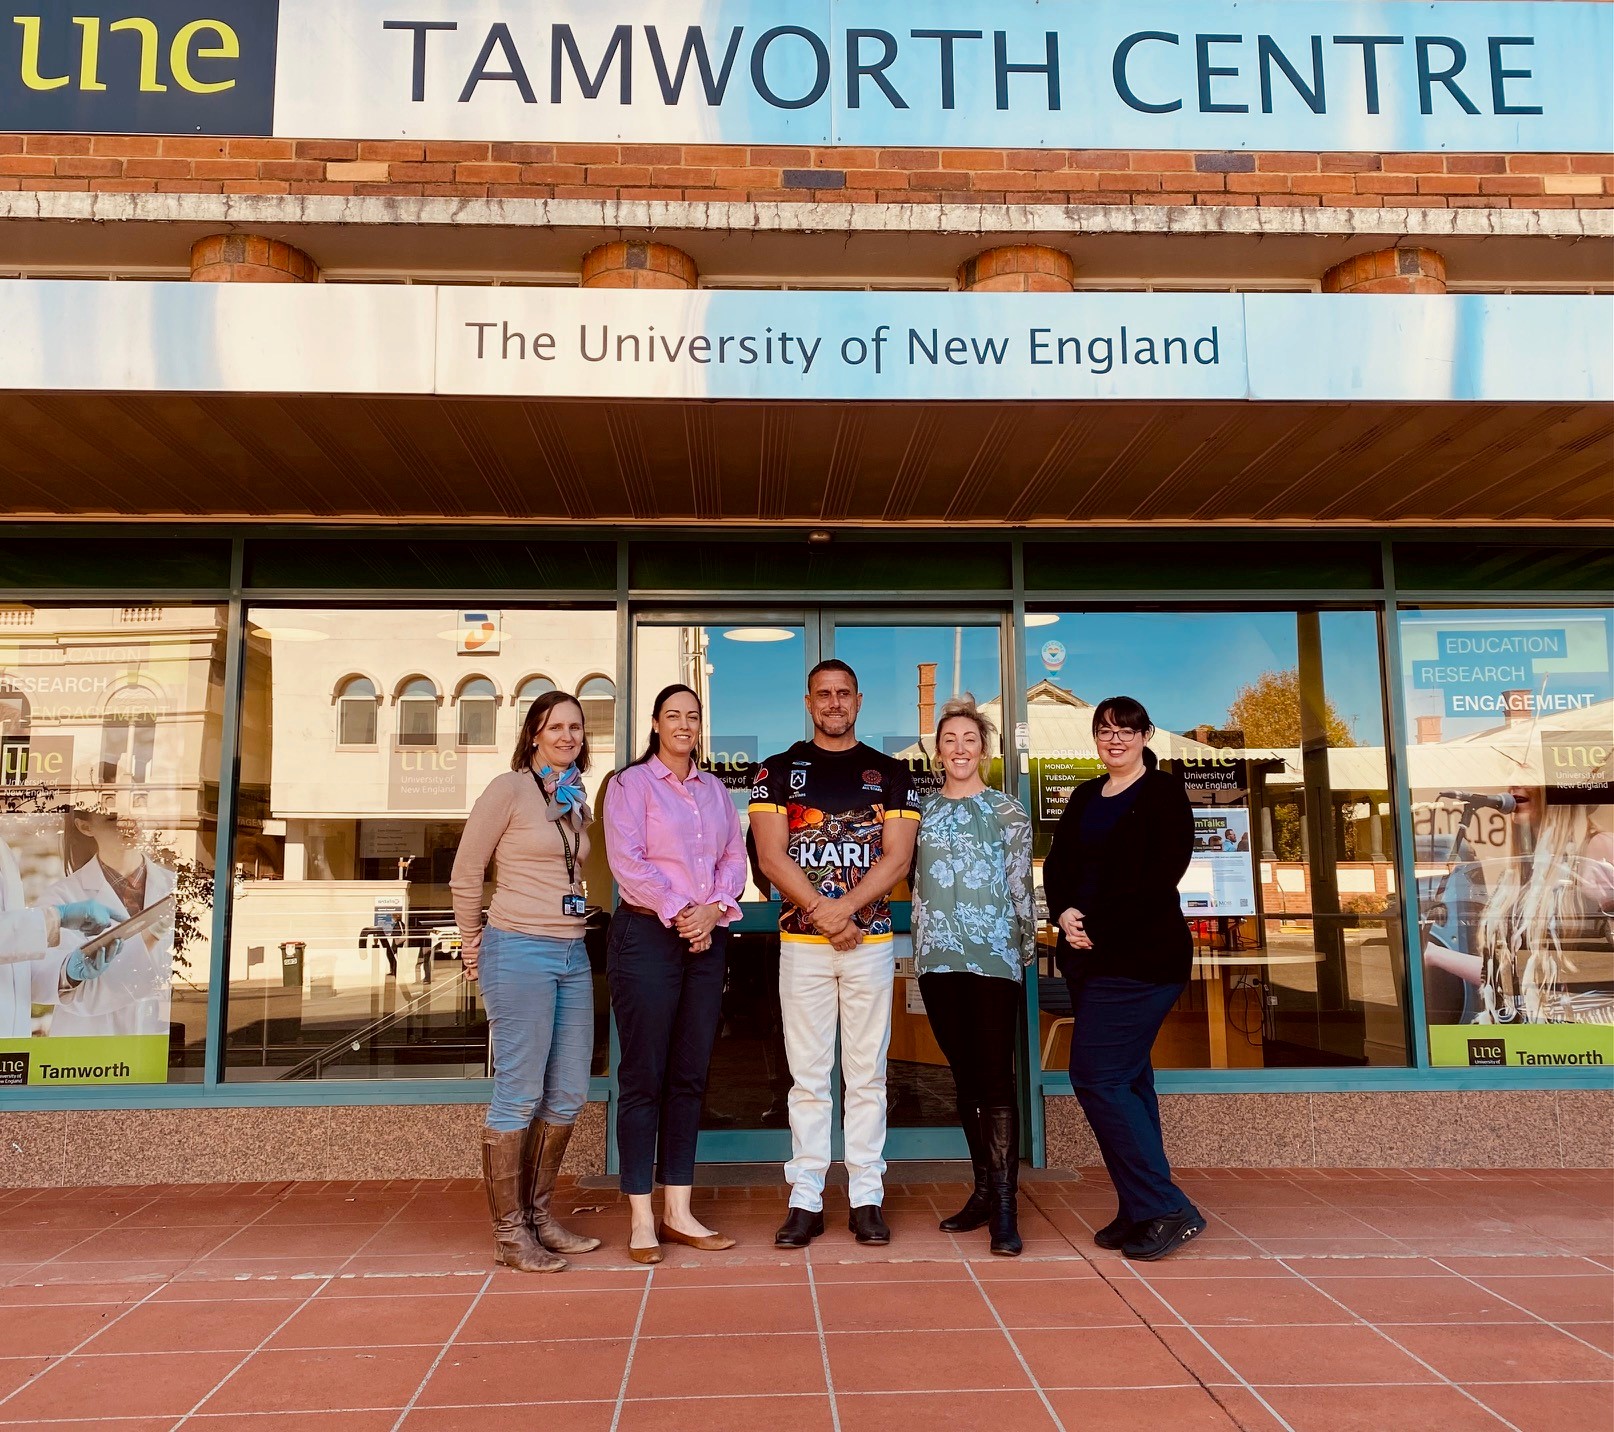 Five smiling UNE Tamworth Staff members stand by the front door of the UNE Tamworth building.